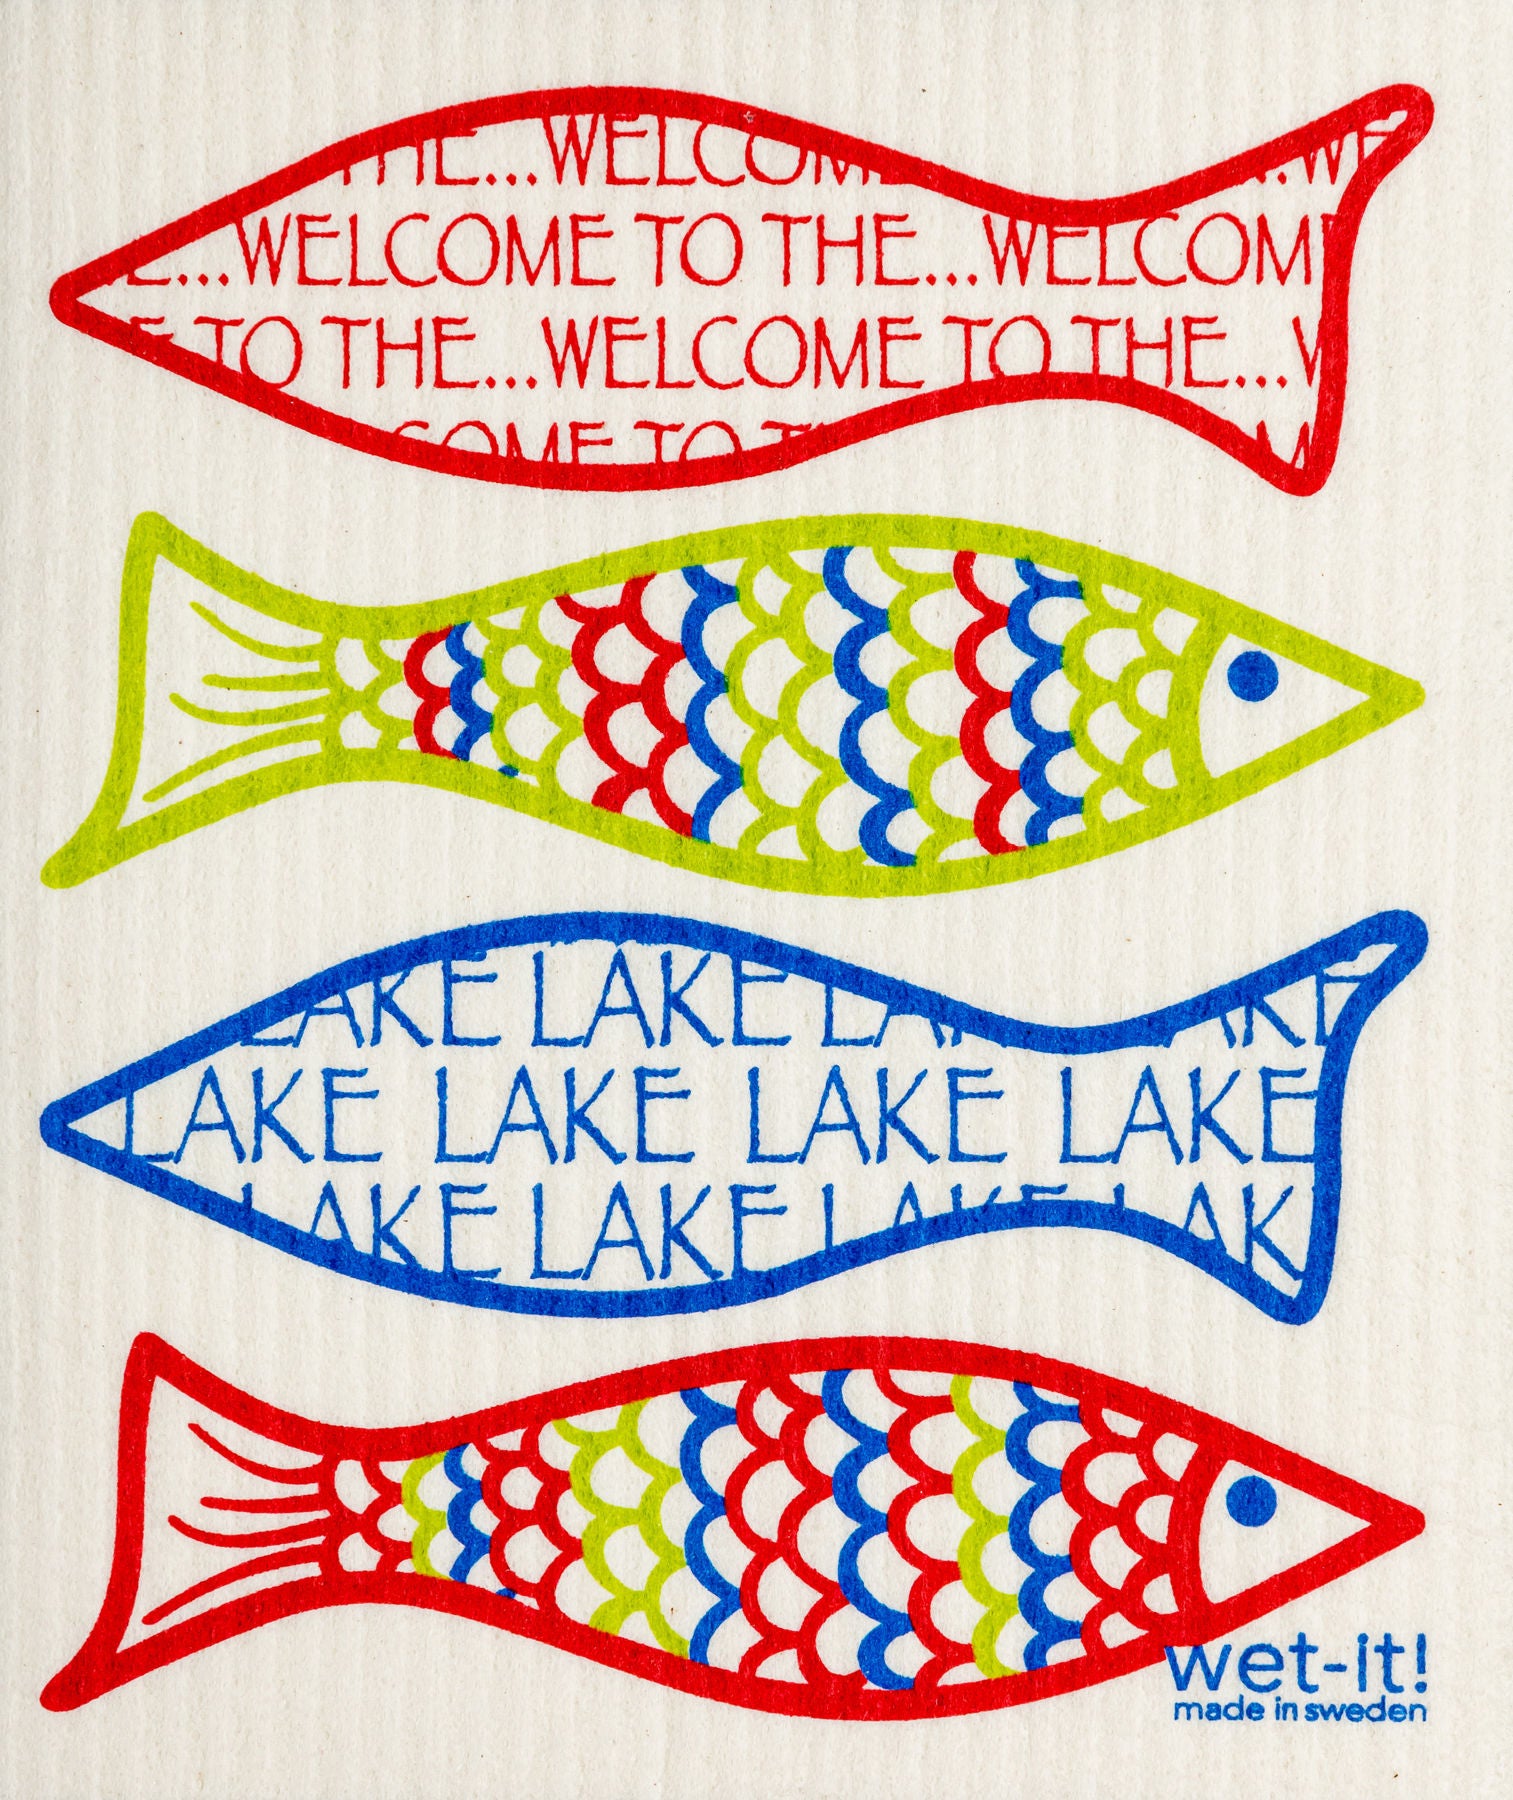 Wet-it - Welcome To The Lake W21-11